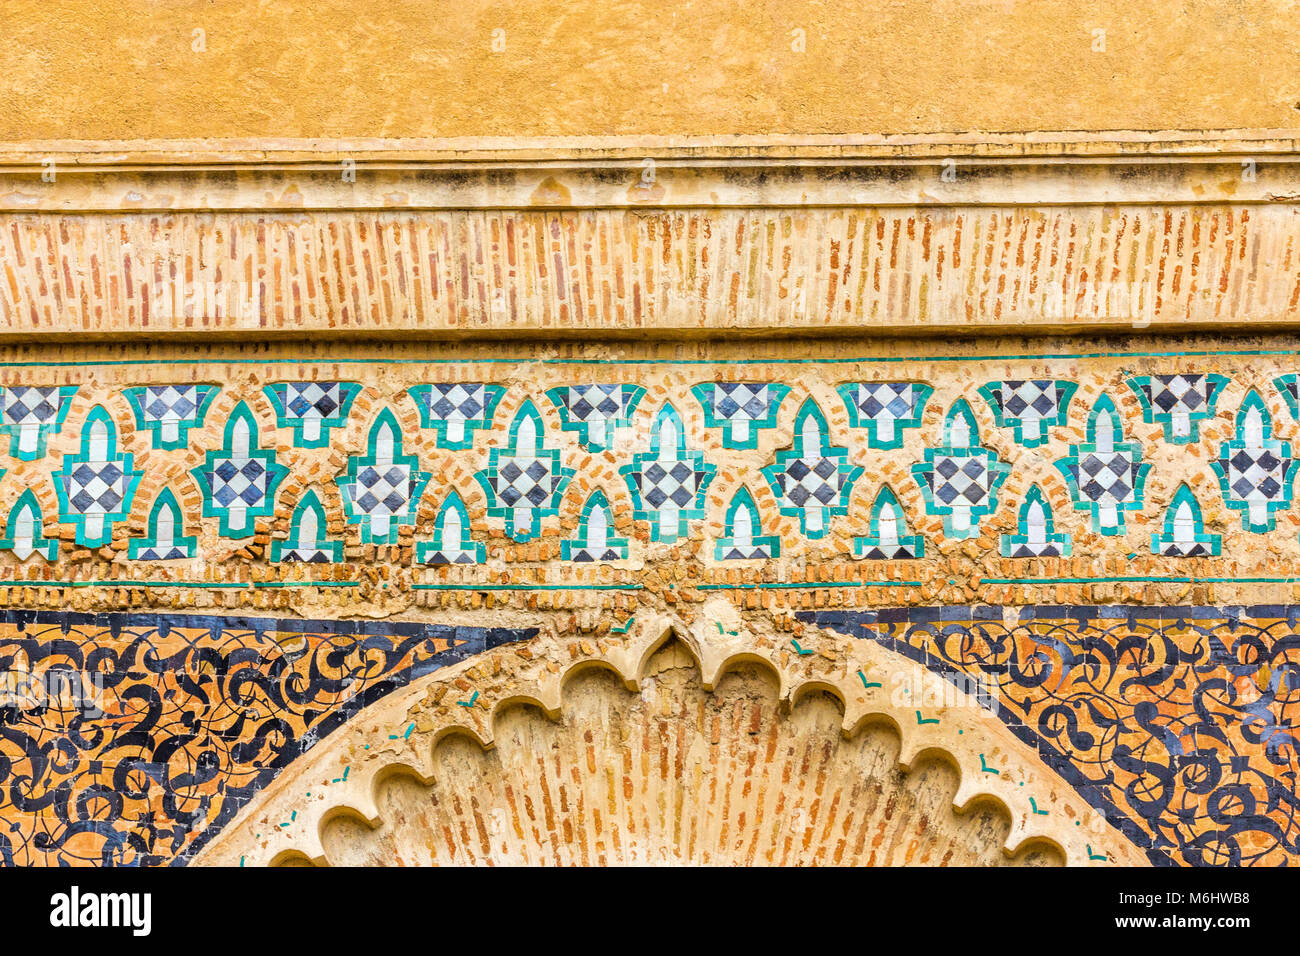 close-up detail of intricate tiling on a typical ornate building in Fez, Morocco Stock Photo